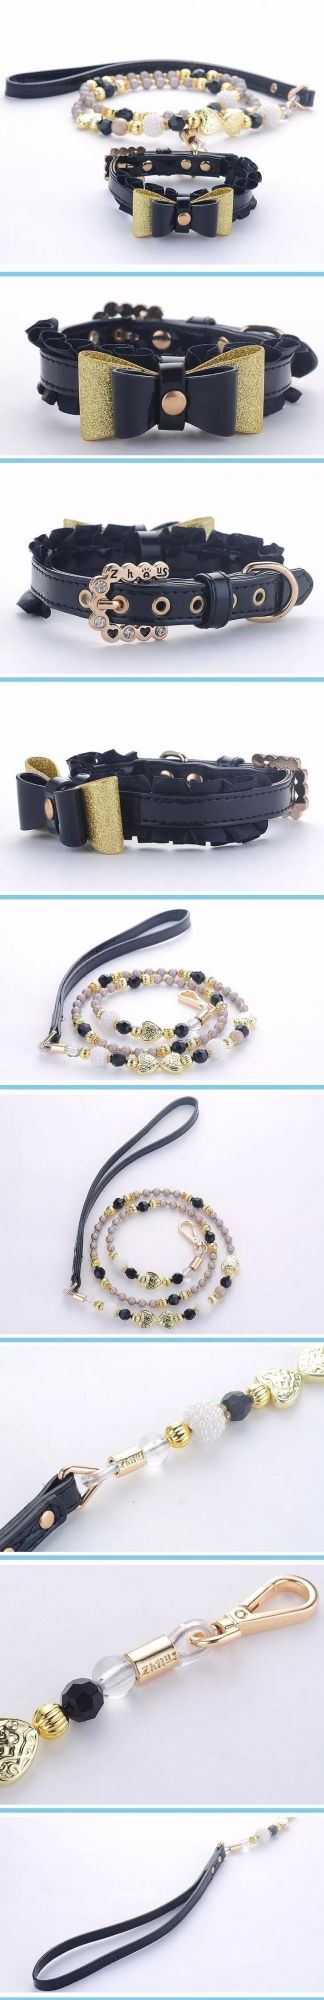 Fashion Jeweled Black Crystal Bow Dog Collar and Leash Set for Pet Cat Small Dog Leash Pearl Necklace Chain